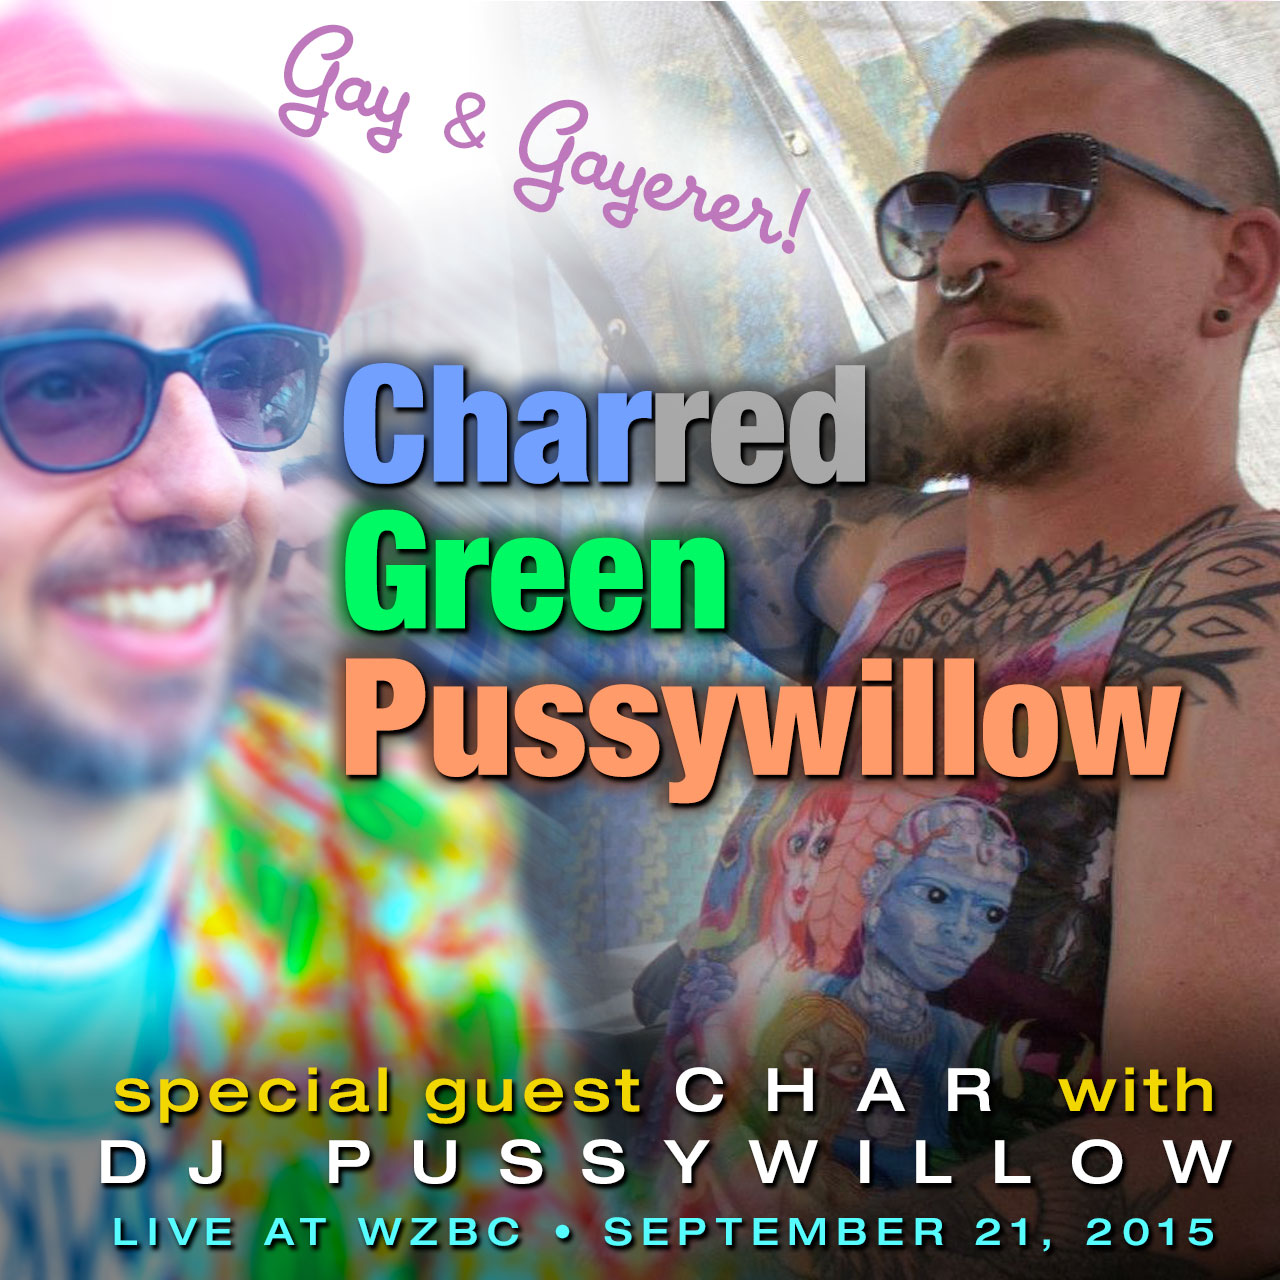 Char and Pussywillow Live on WZBC, September 21, 2015